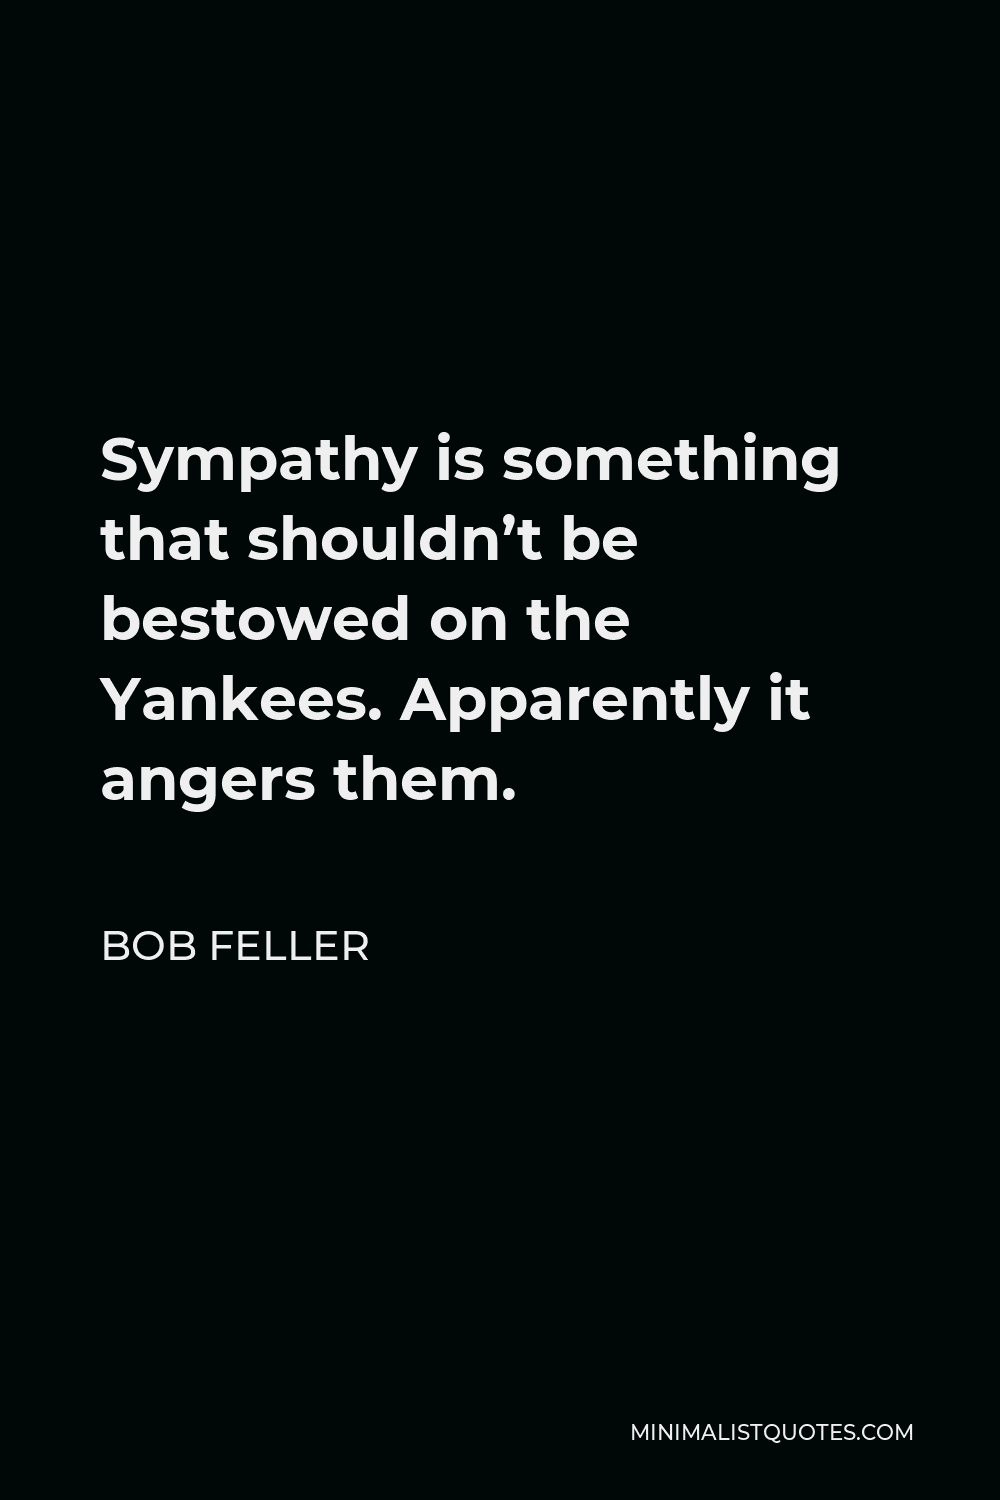 Bob Feller Quote - Sympathy is something that shouldn’t be bestowed on the Yankees. Apparently it angers them.